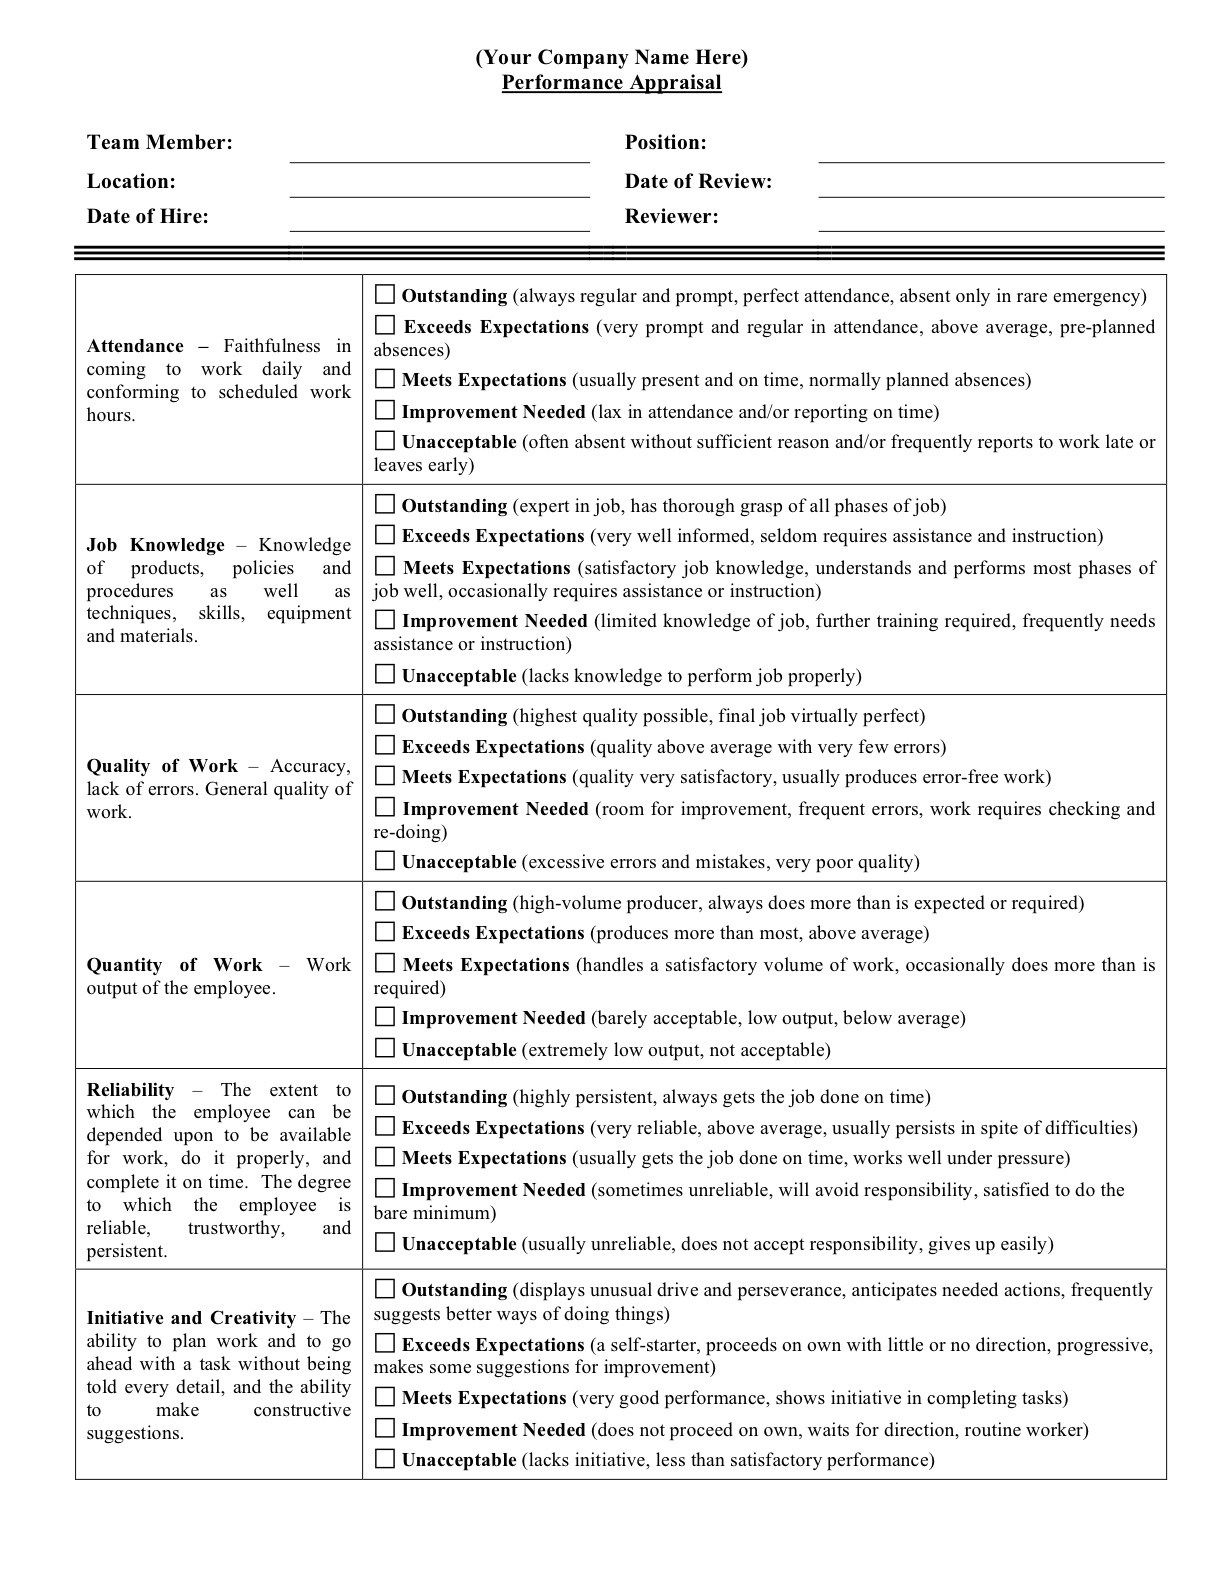 Performance Appraisal Form For Employees Staff Performance 